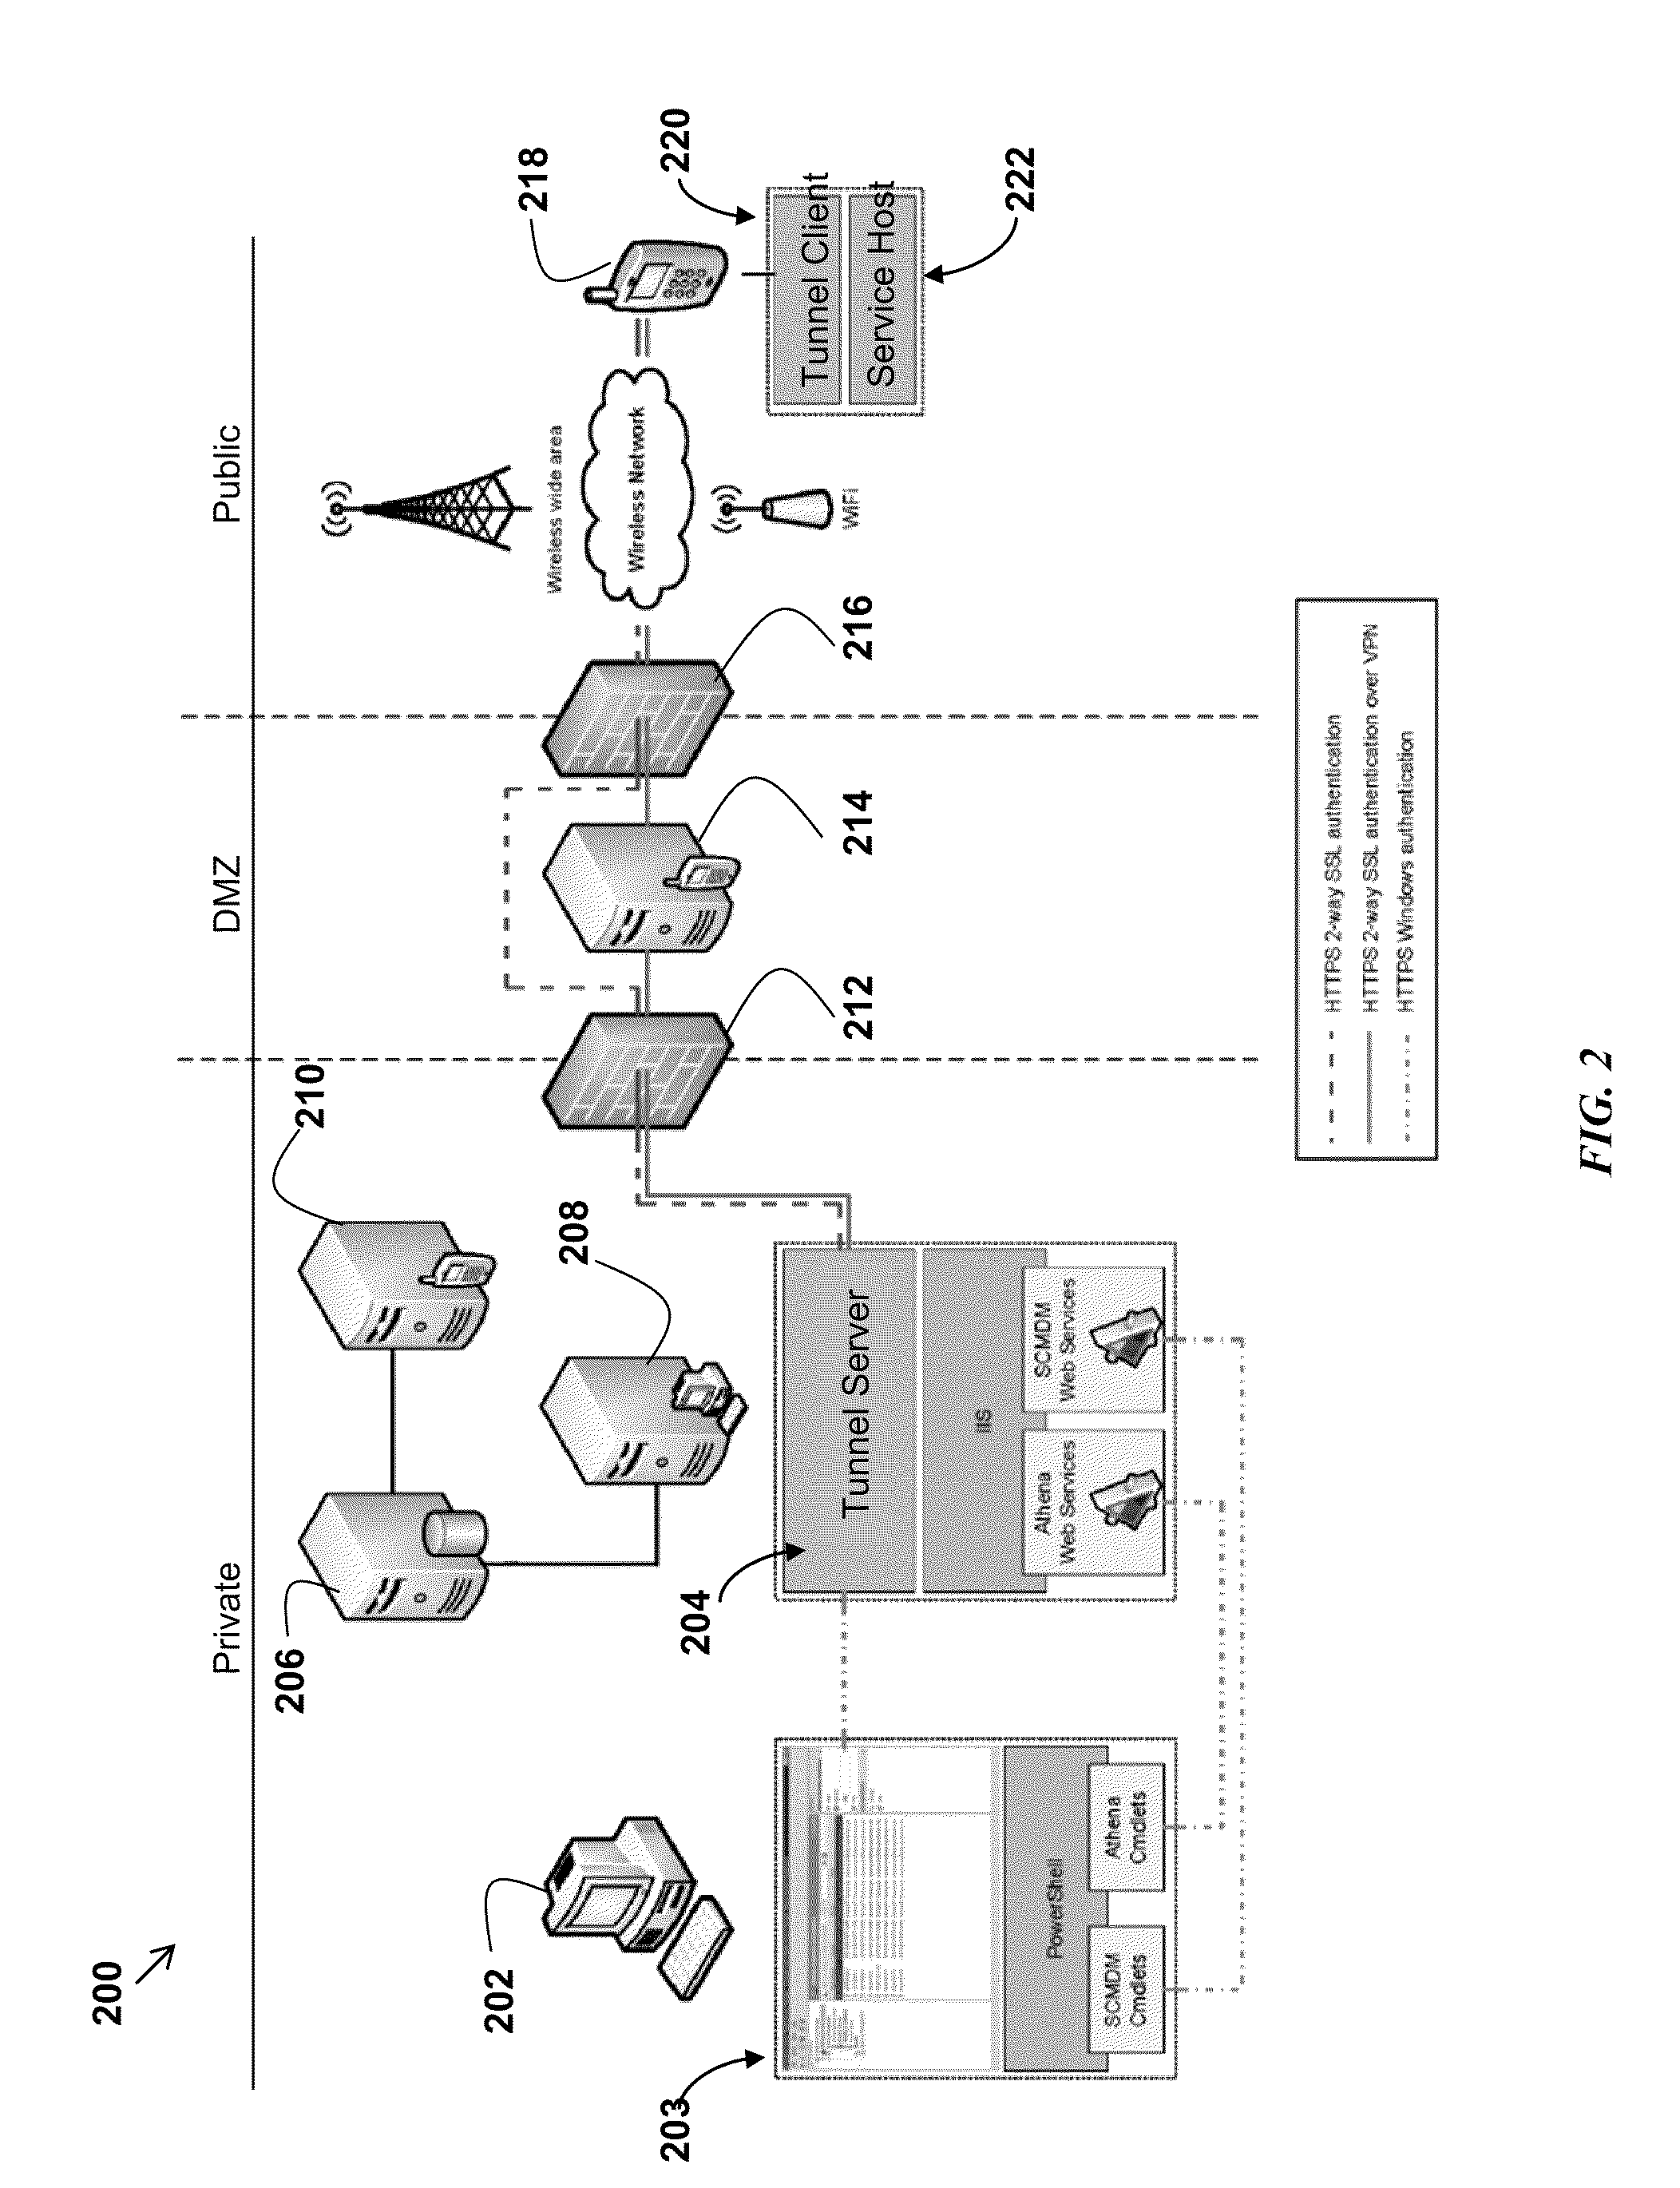 Method, system, and computer readable medium for gathering usage statistics